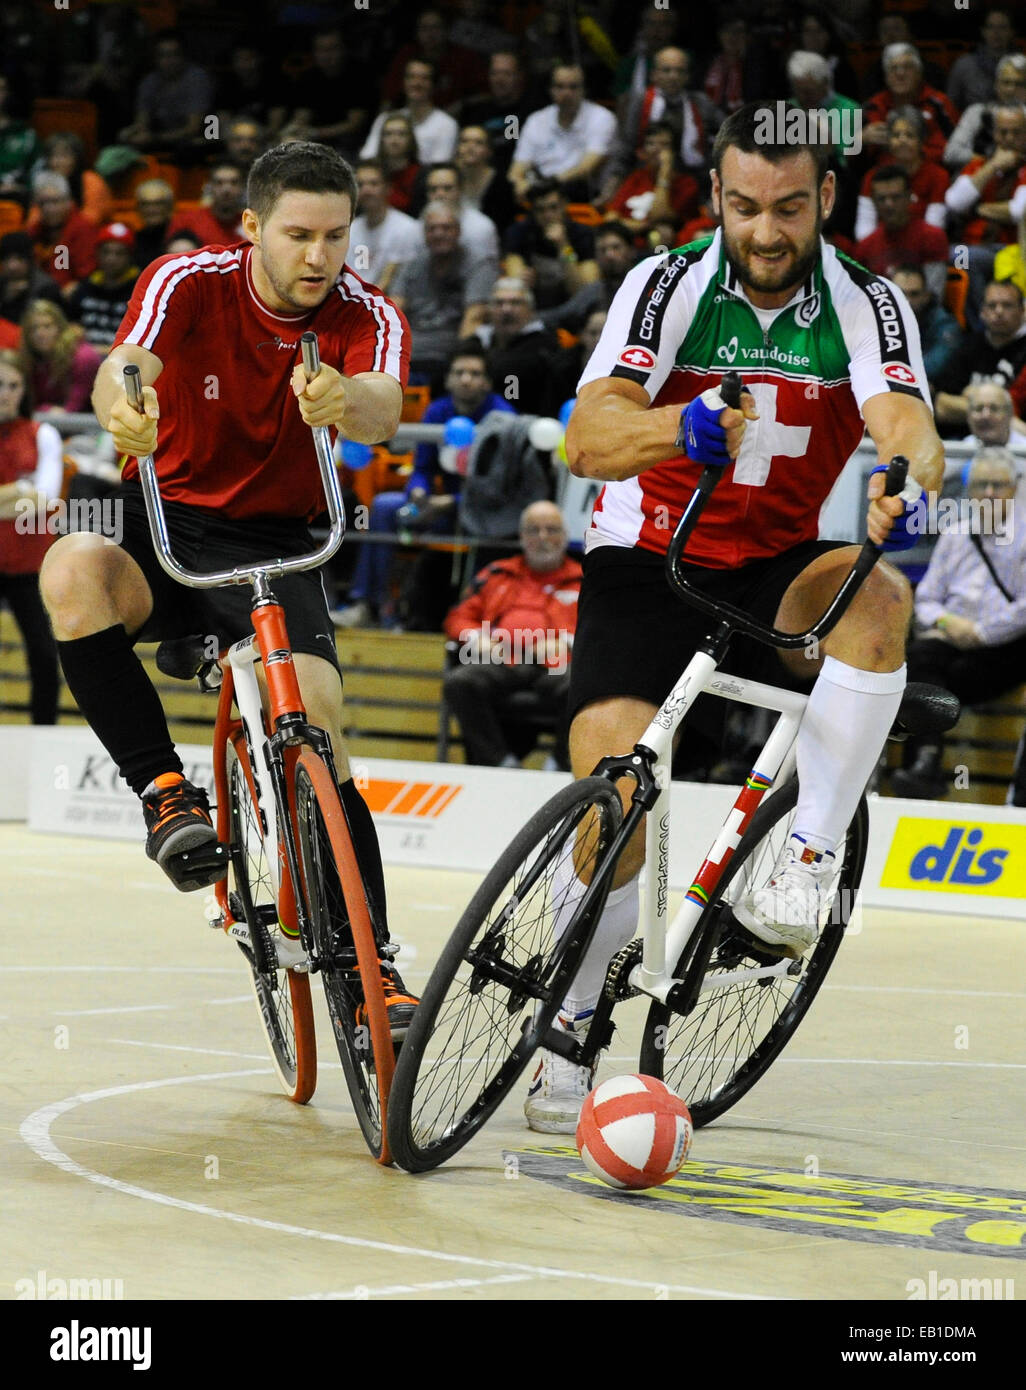 Dominik Planzer of Schwitzerland, right, and Markus Broell of Austria pictured during the Cycle Ball final at the Indoor Cycling World Championships 2014 in Brno, Czech Republic, November 23, 2014. (CTK Photo/Vaclav Salek) Stock Photo